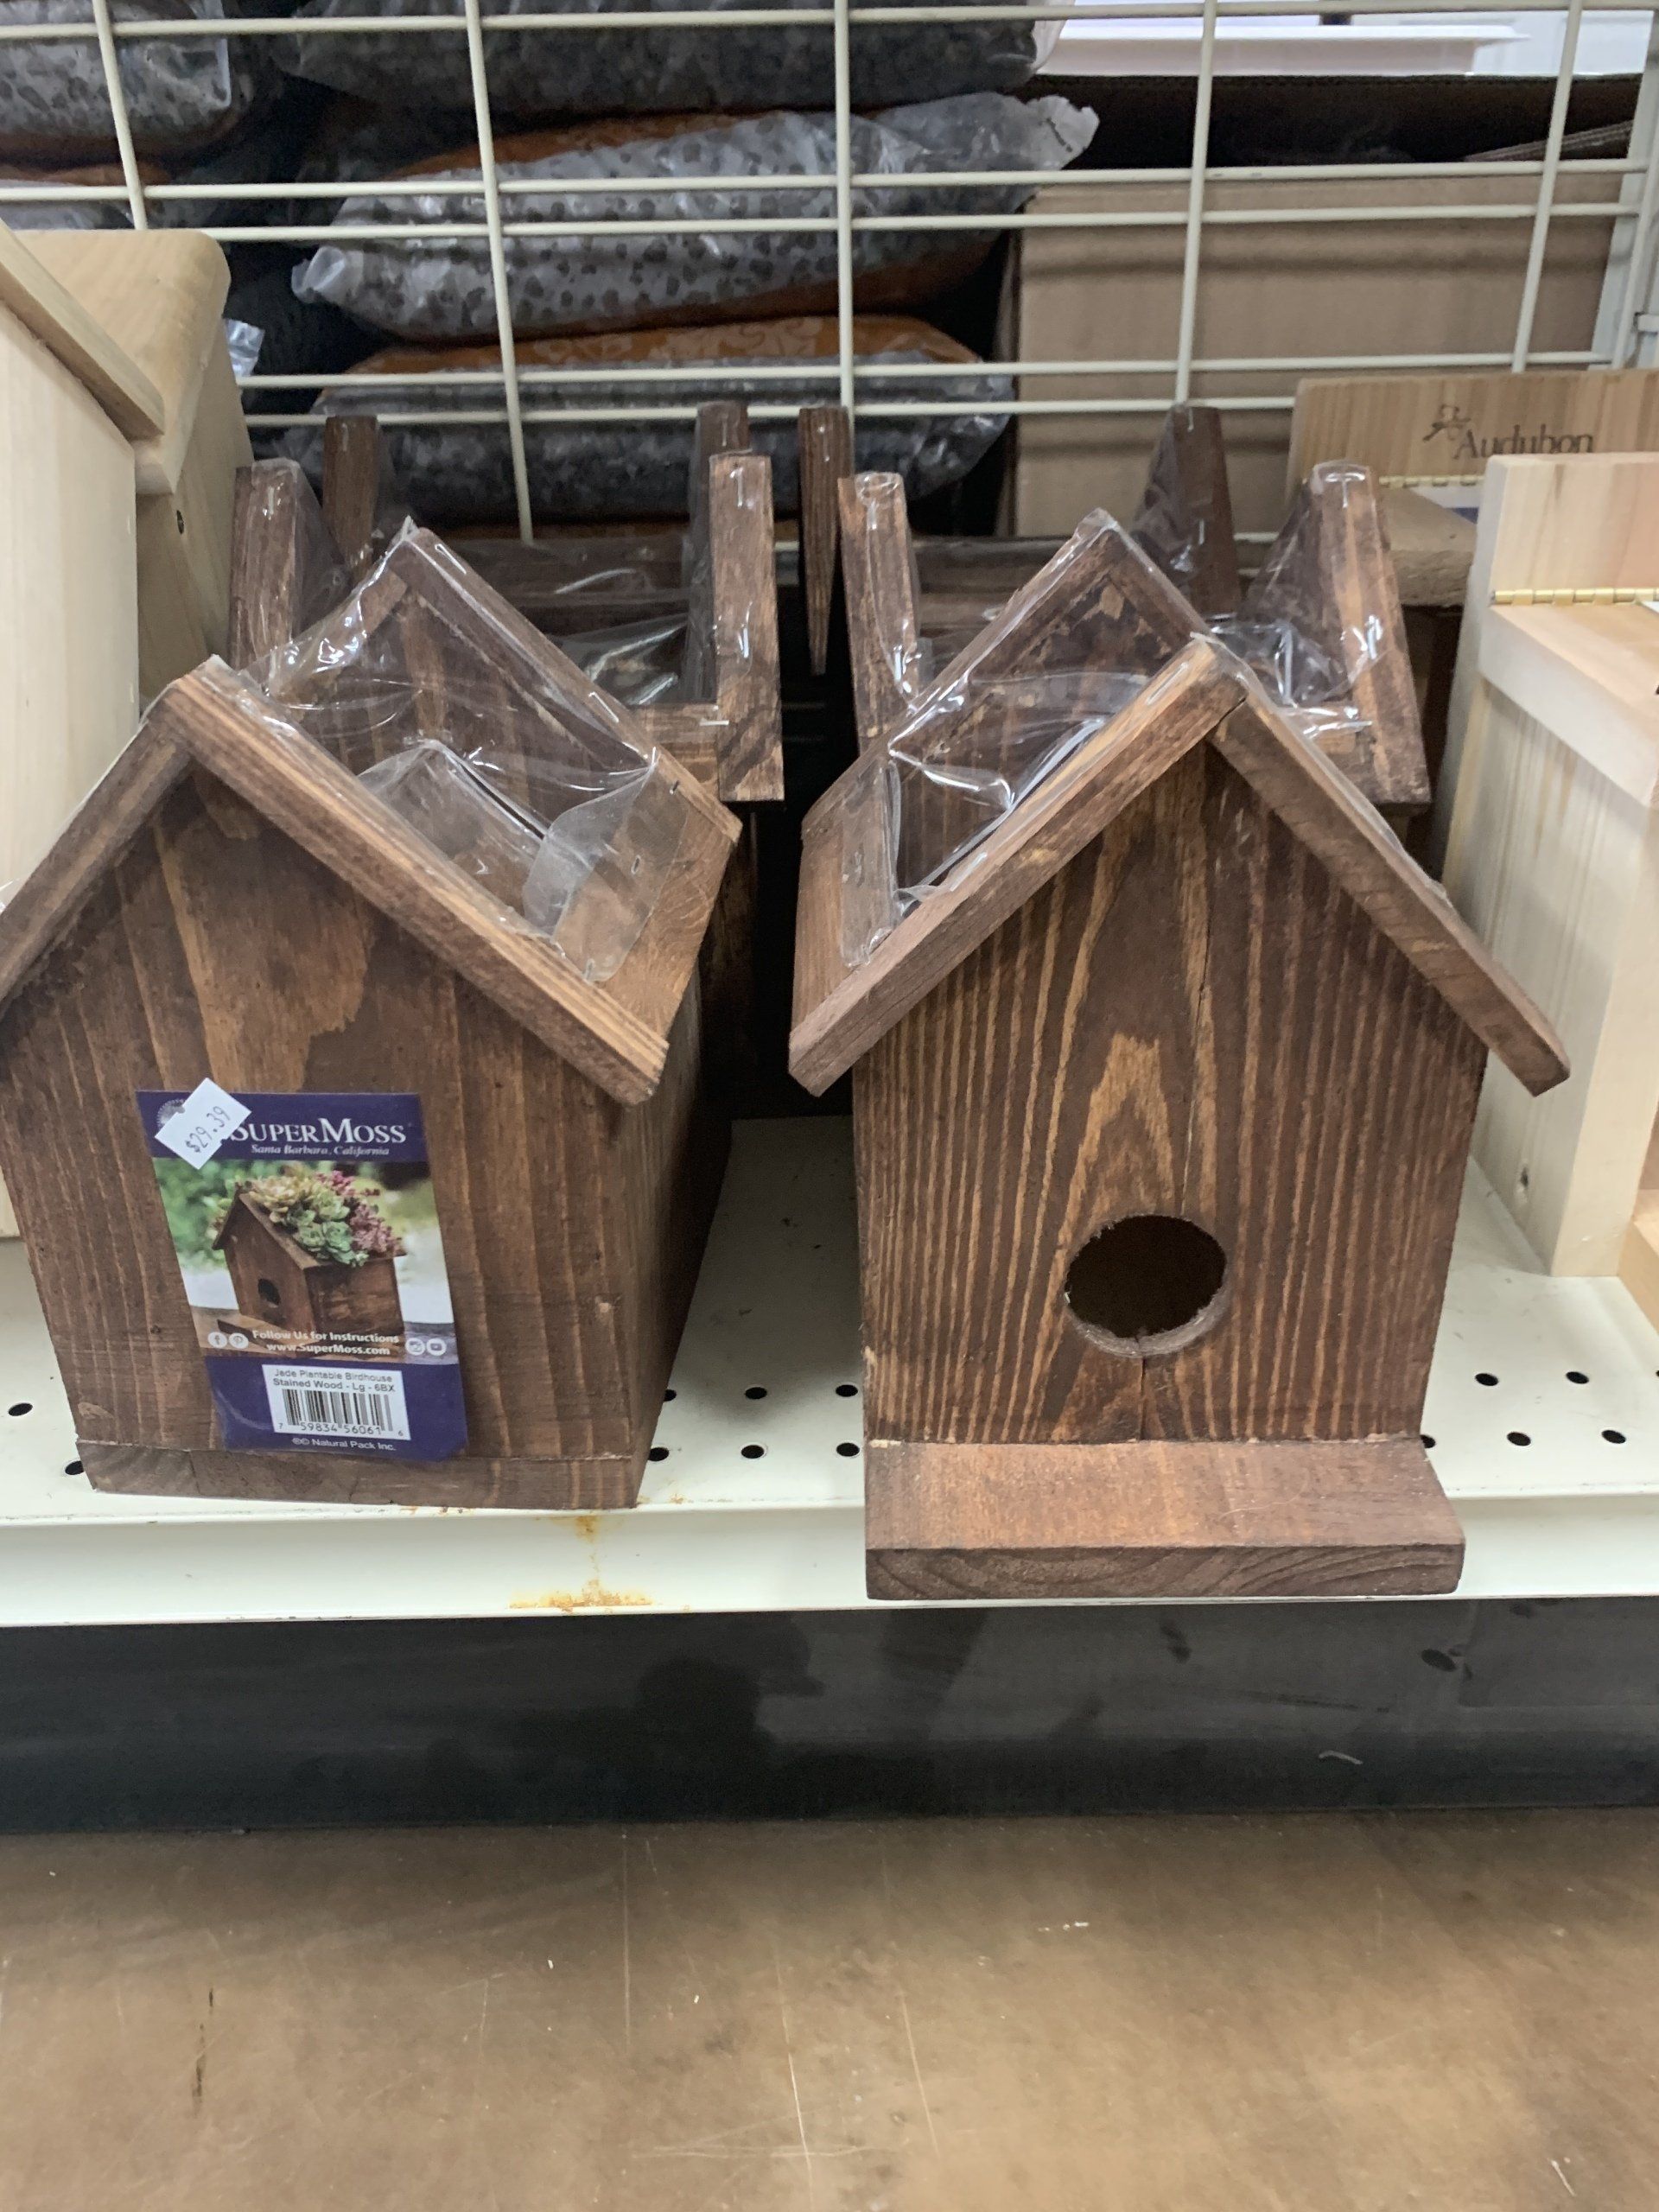 SuperMoss Wooden Birdhouse with Garden Section on the roof